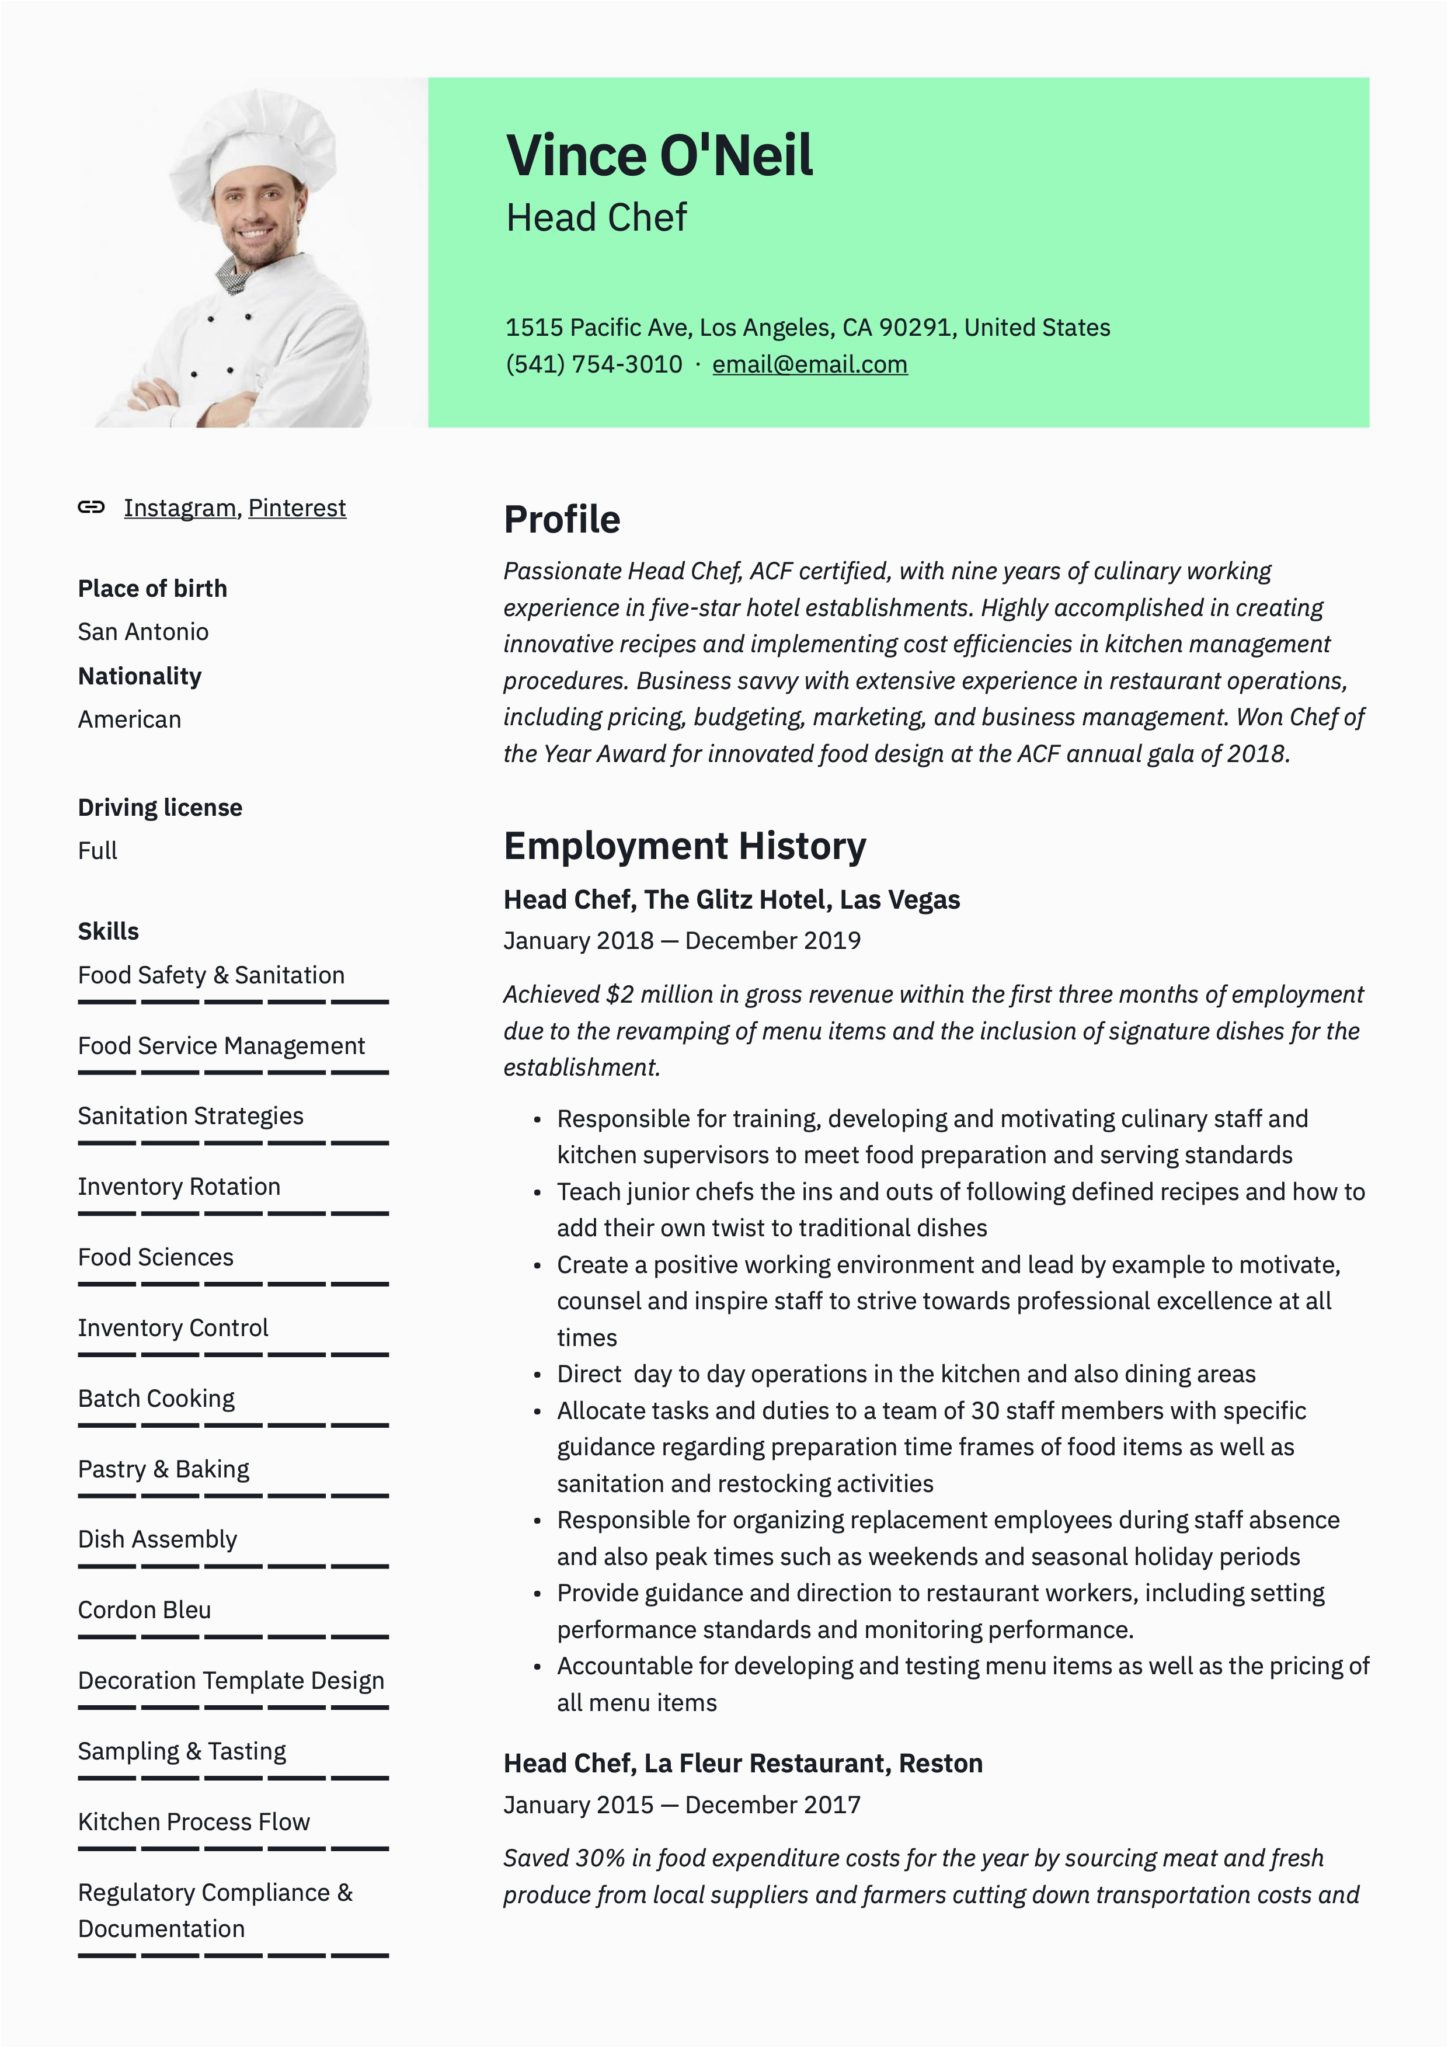 Sample Resume Profile for A Cook Head Chef Resume & Writing Guide 12 Templates